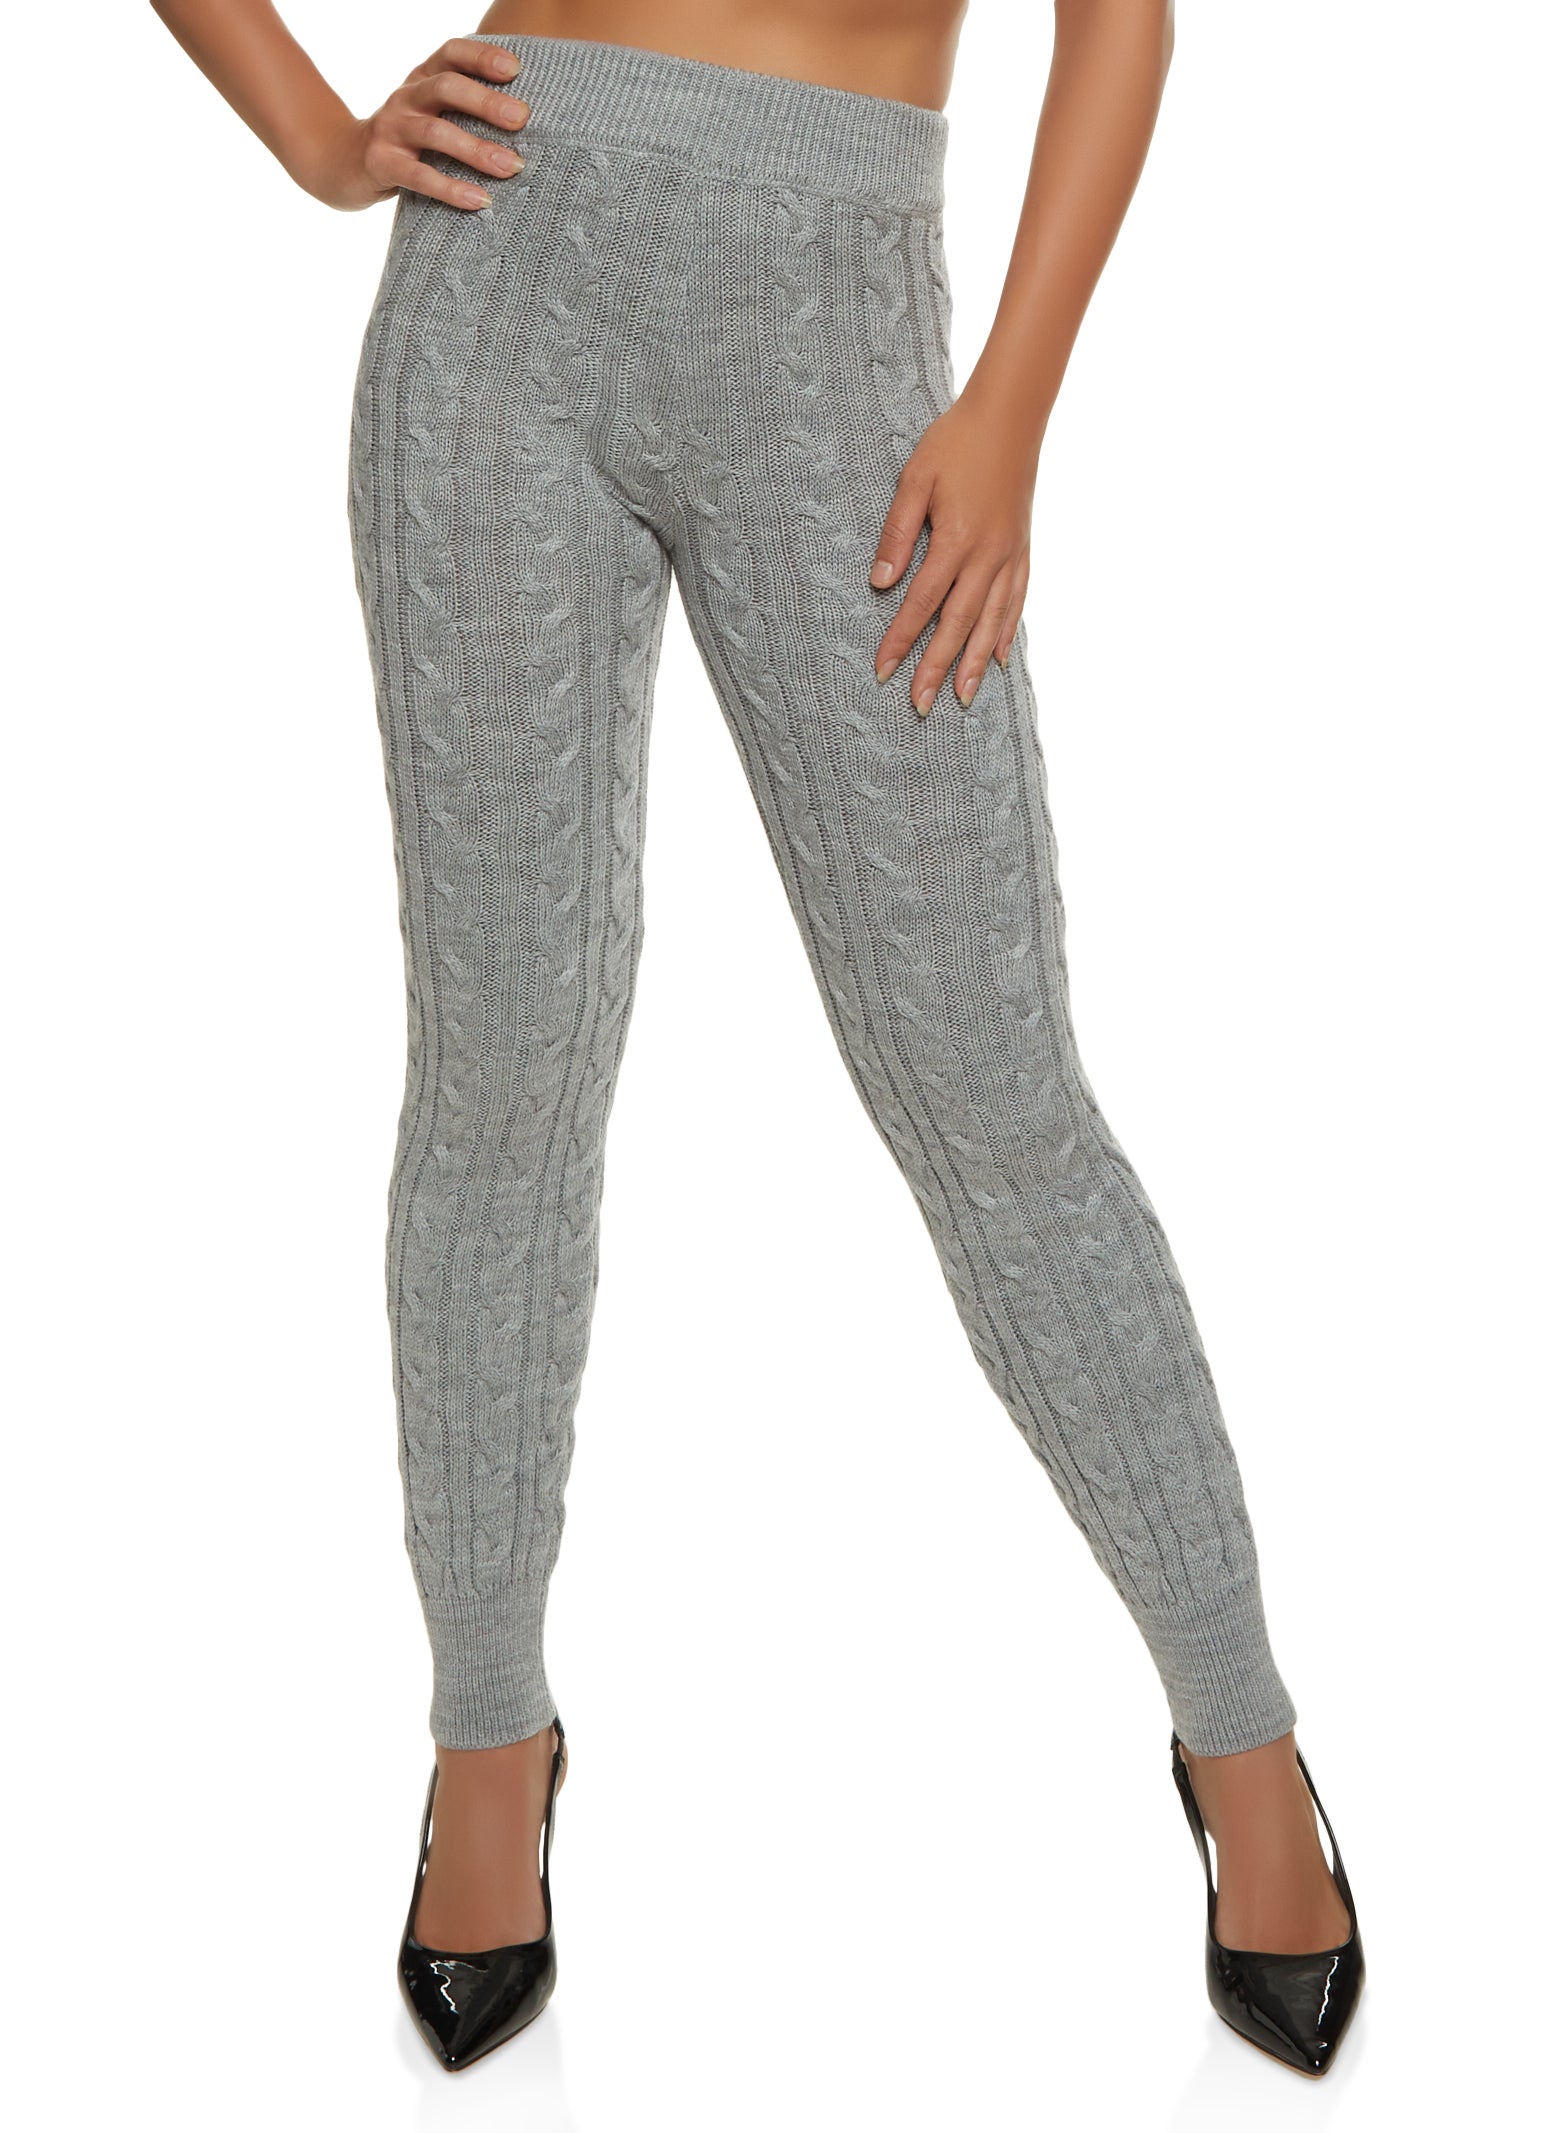 Shop Full Length Cable Knit Sweater Leggings with Elasticated Waistband  Online